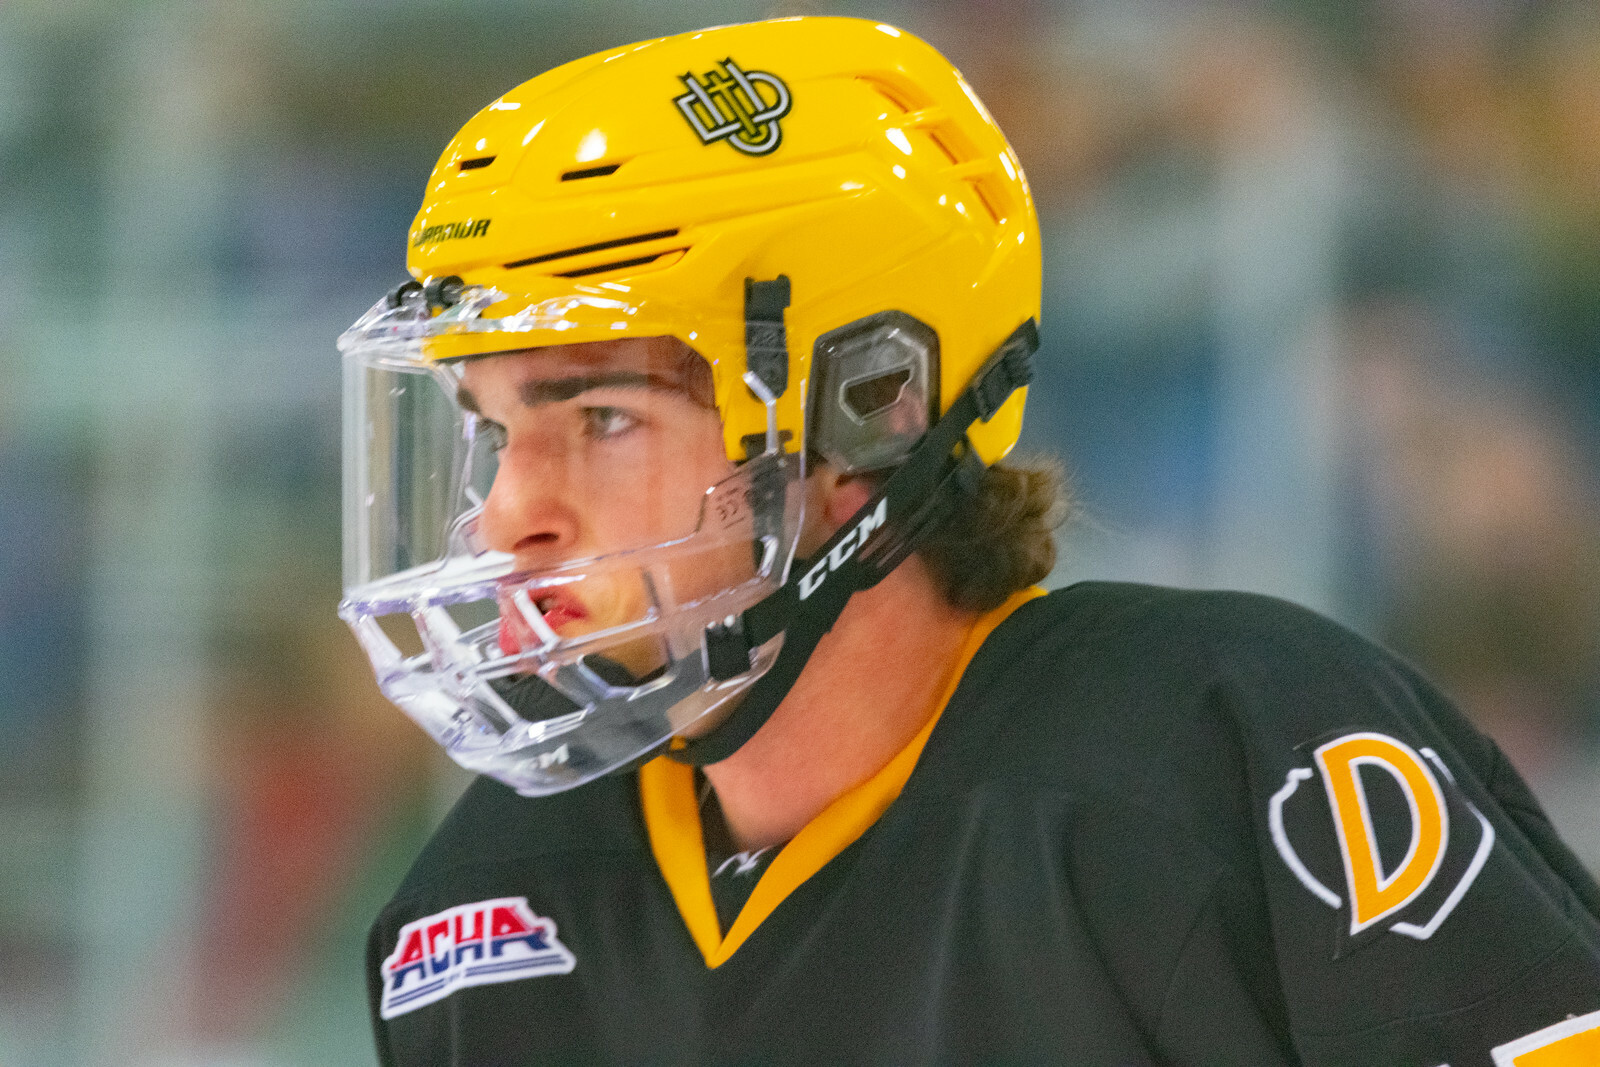 A picture of a Dordt hockey player during a game